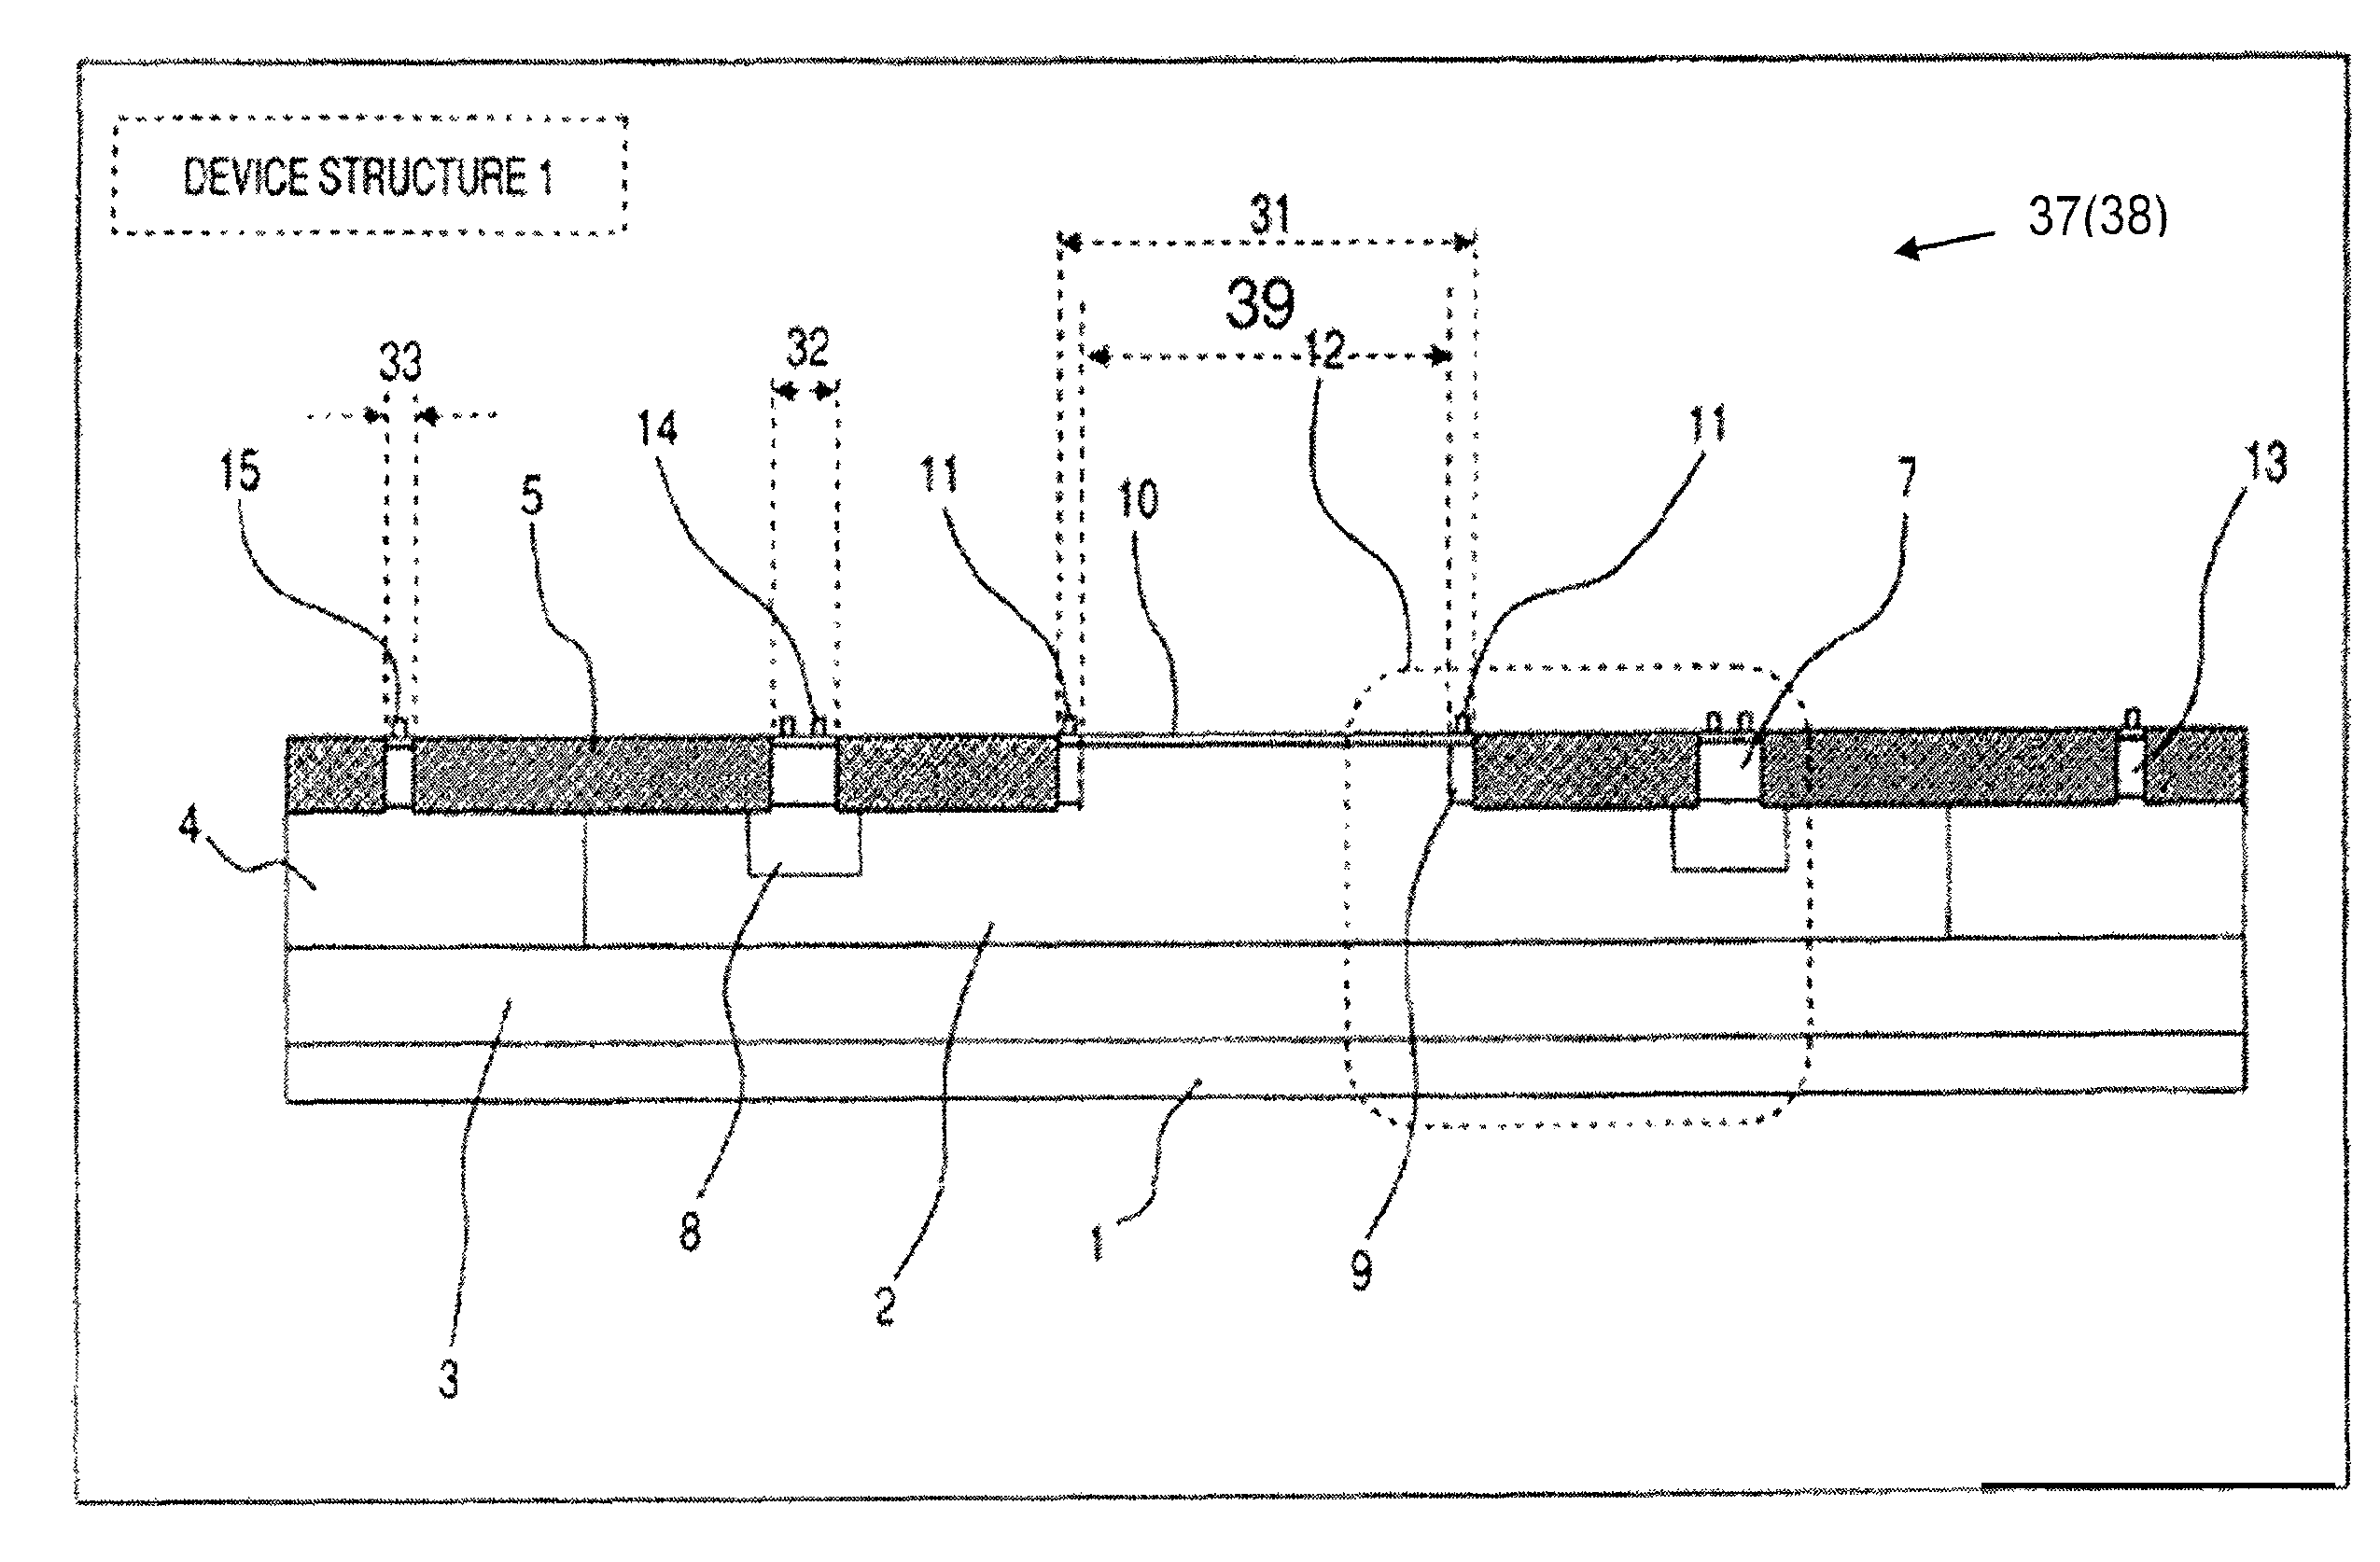 Semiconductor integrated circuit device and a method of manufacturing the same